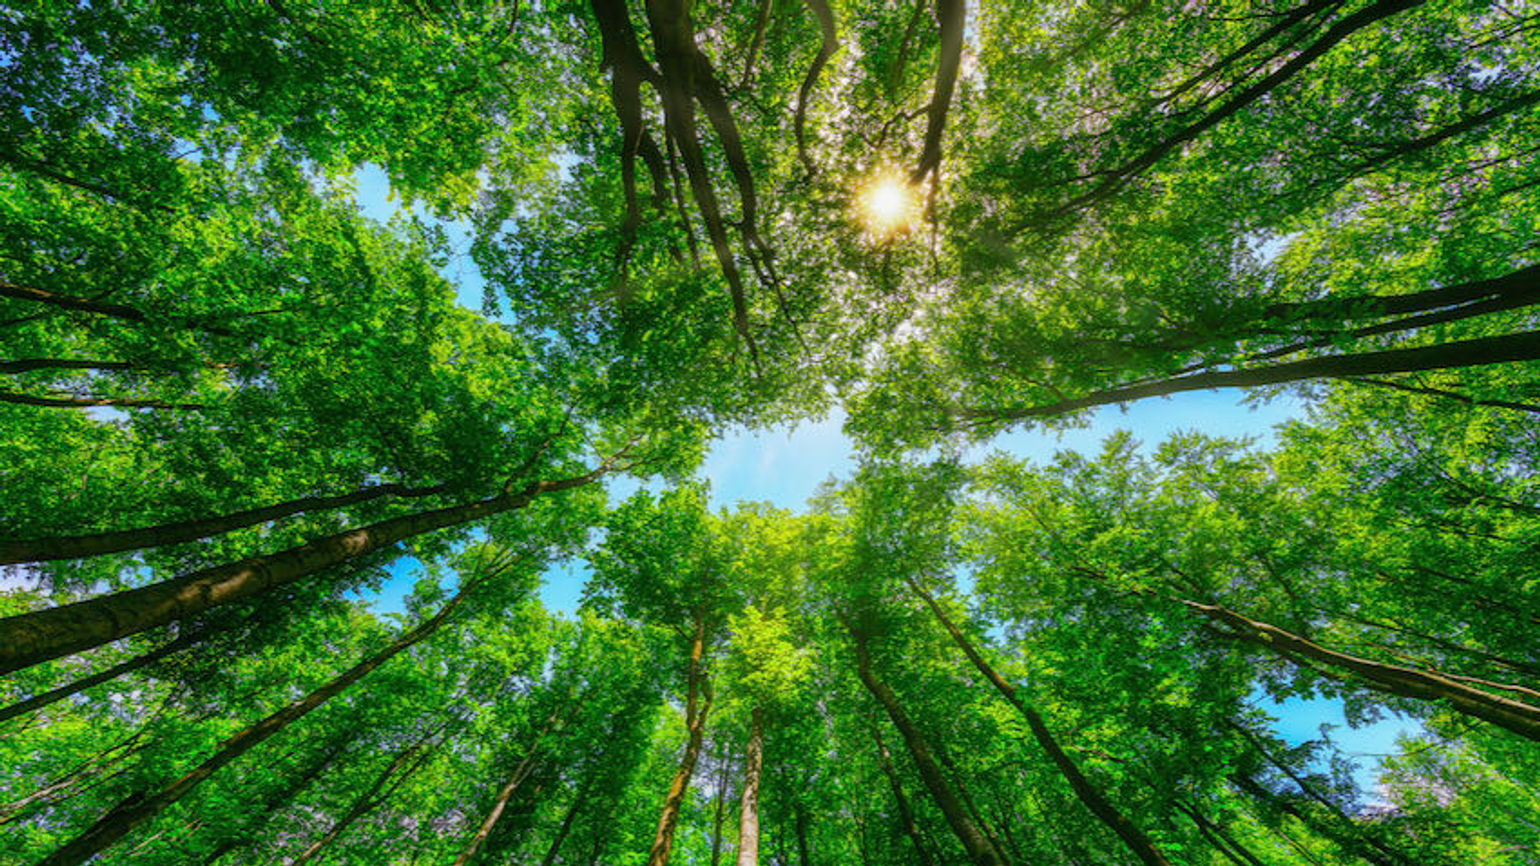 GlobalStar teams up with Trees4Travel for sustainability drive